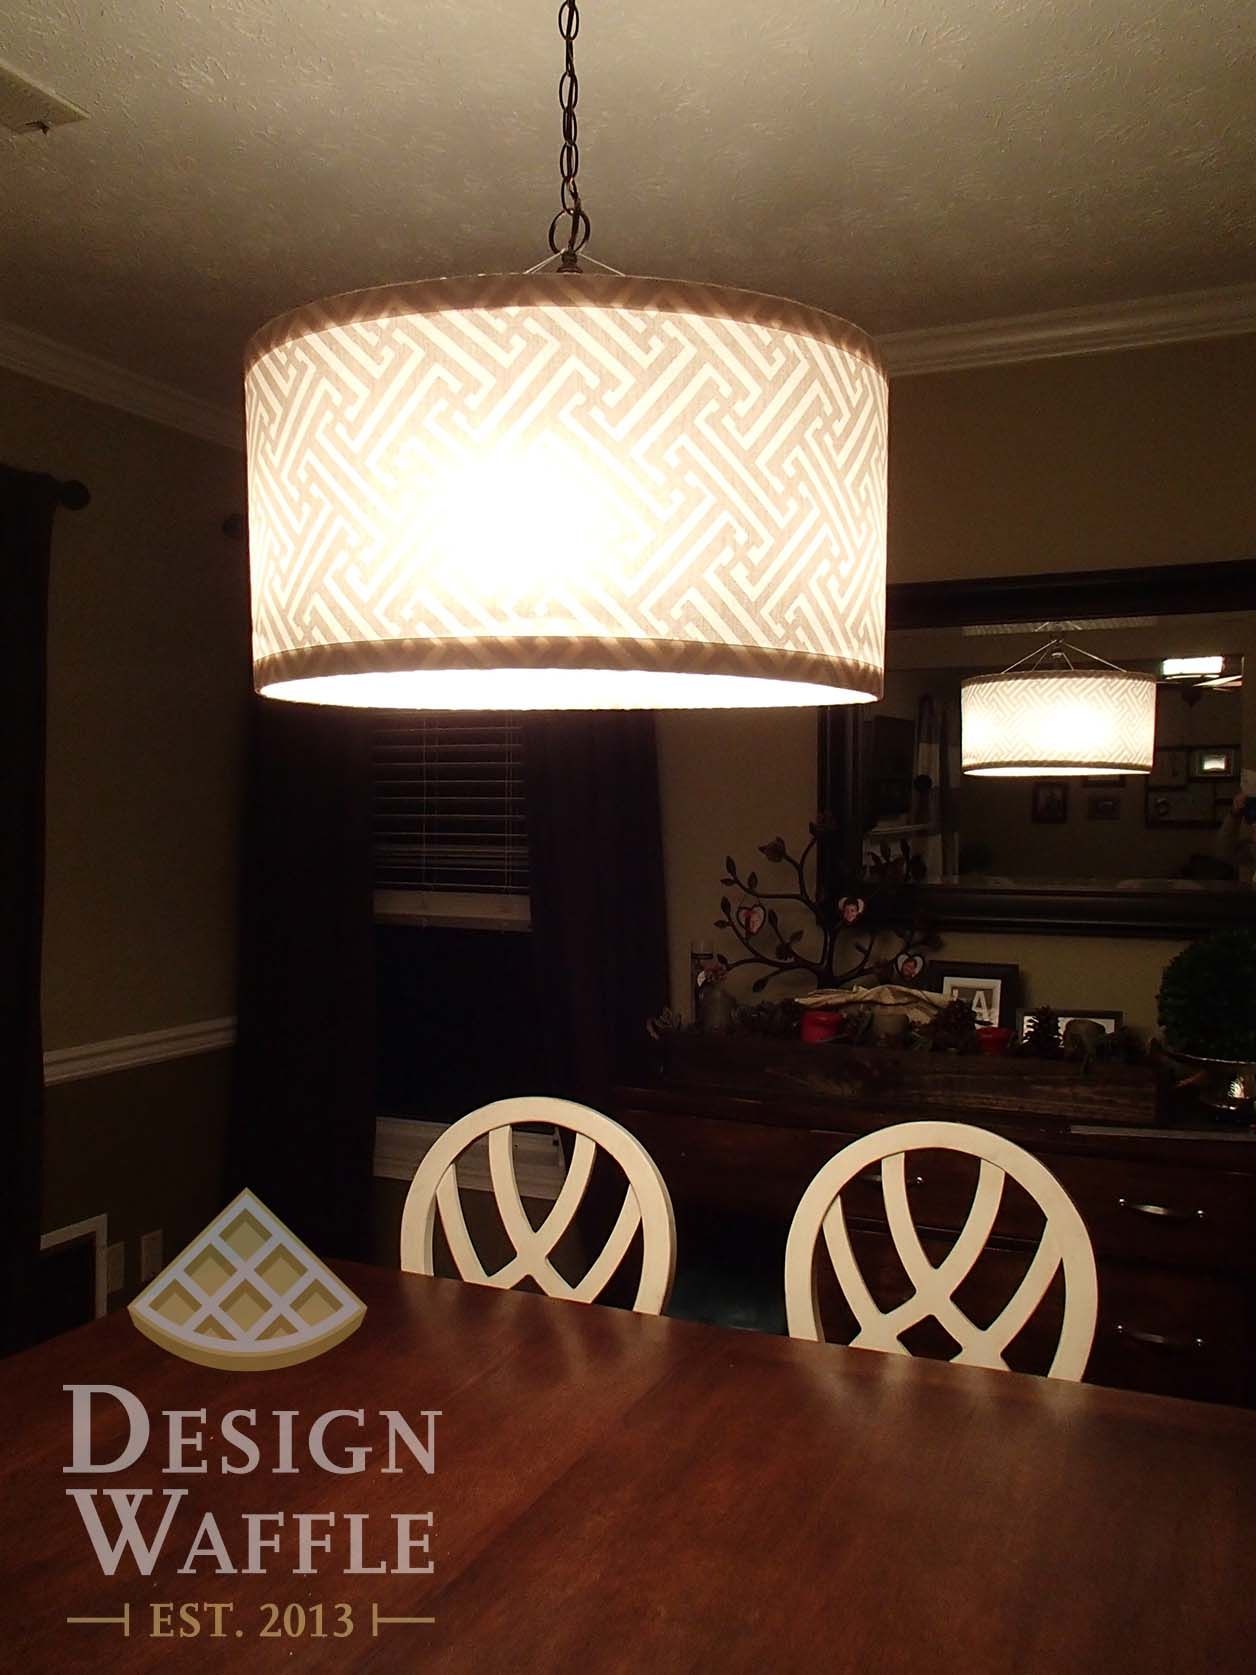 Diy Chandelier Drum Shade Design Waffle For Drum Lamp Shades For Chandeliers (View 6 of 25)